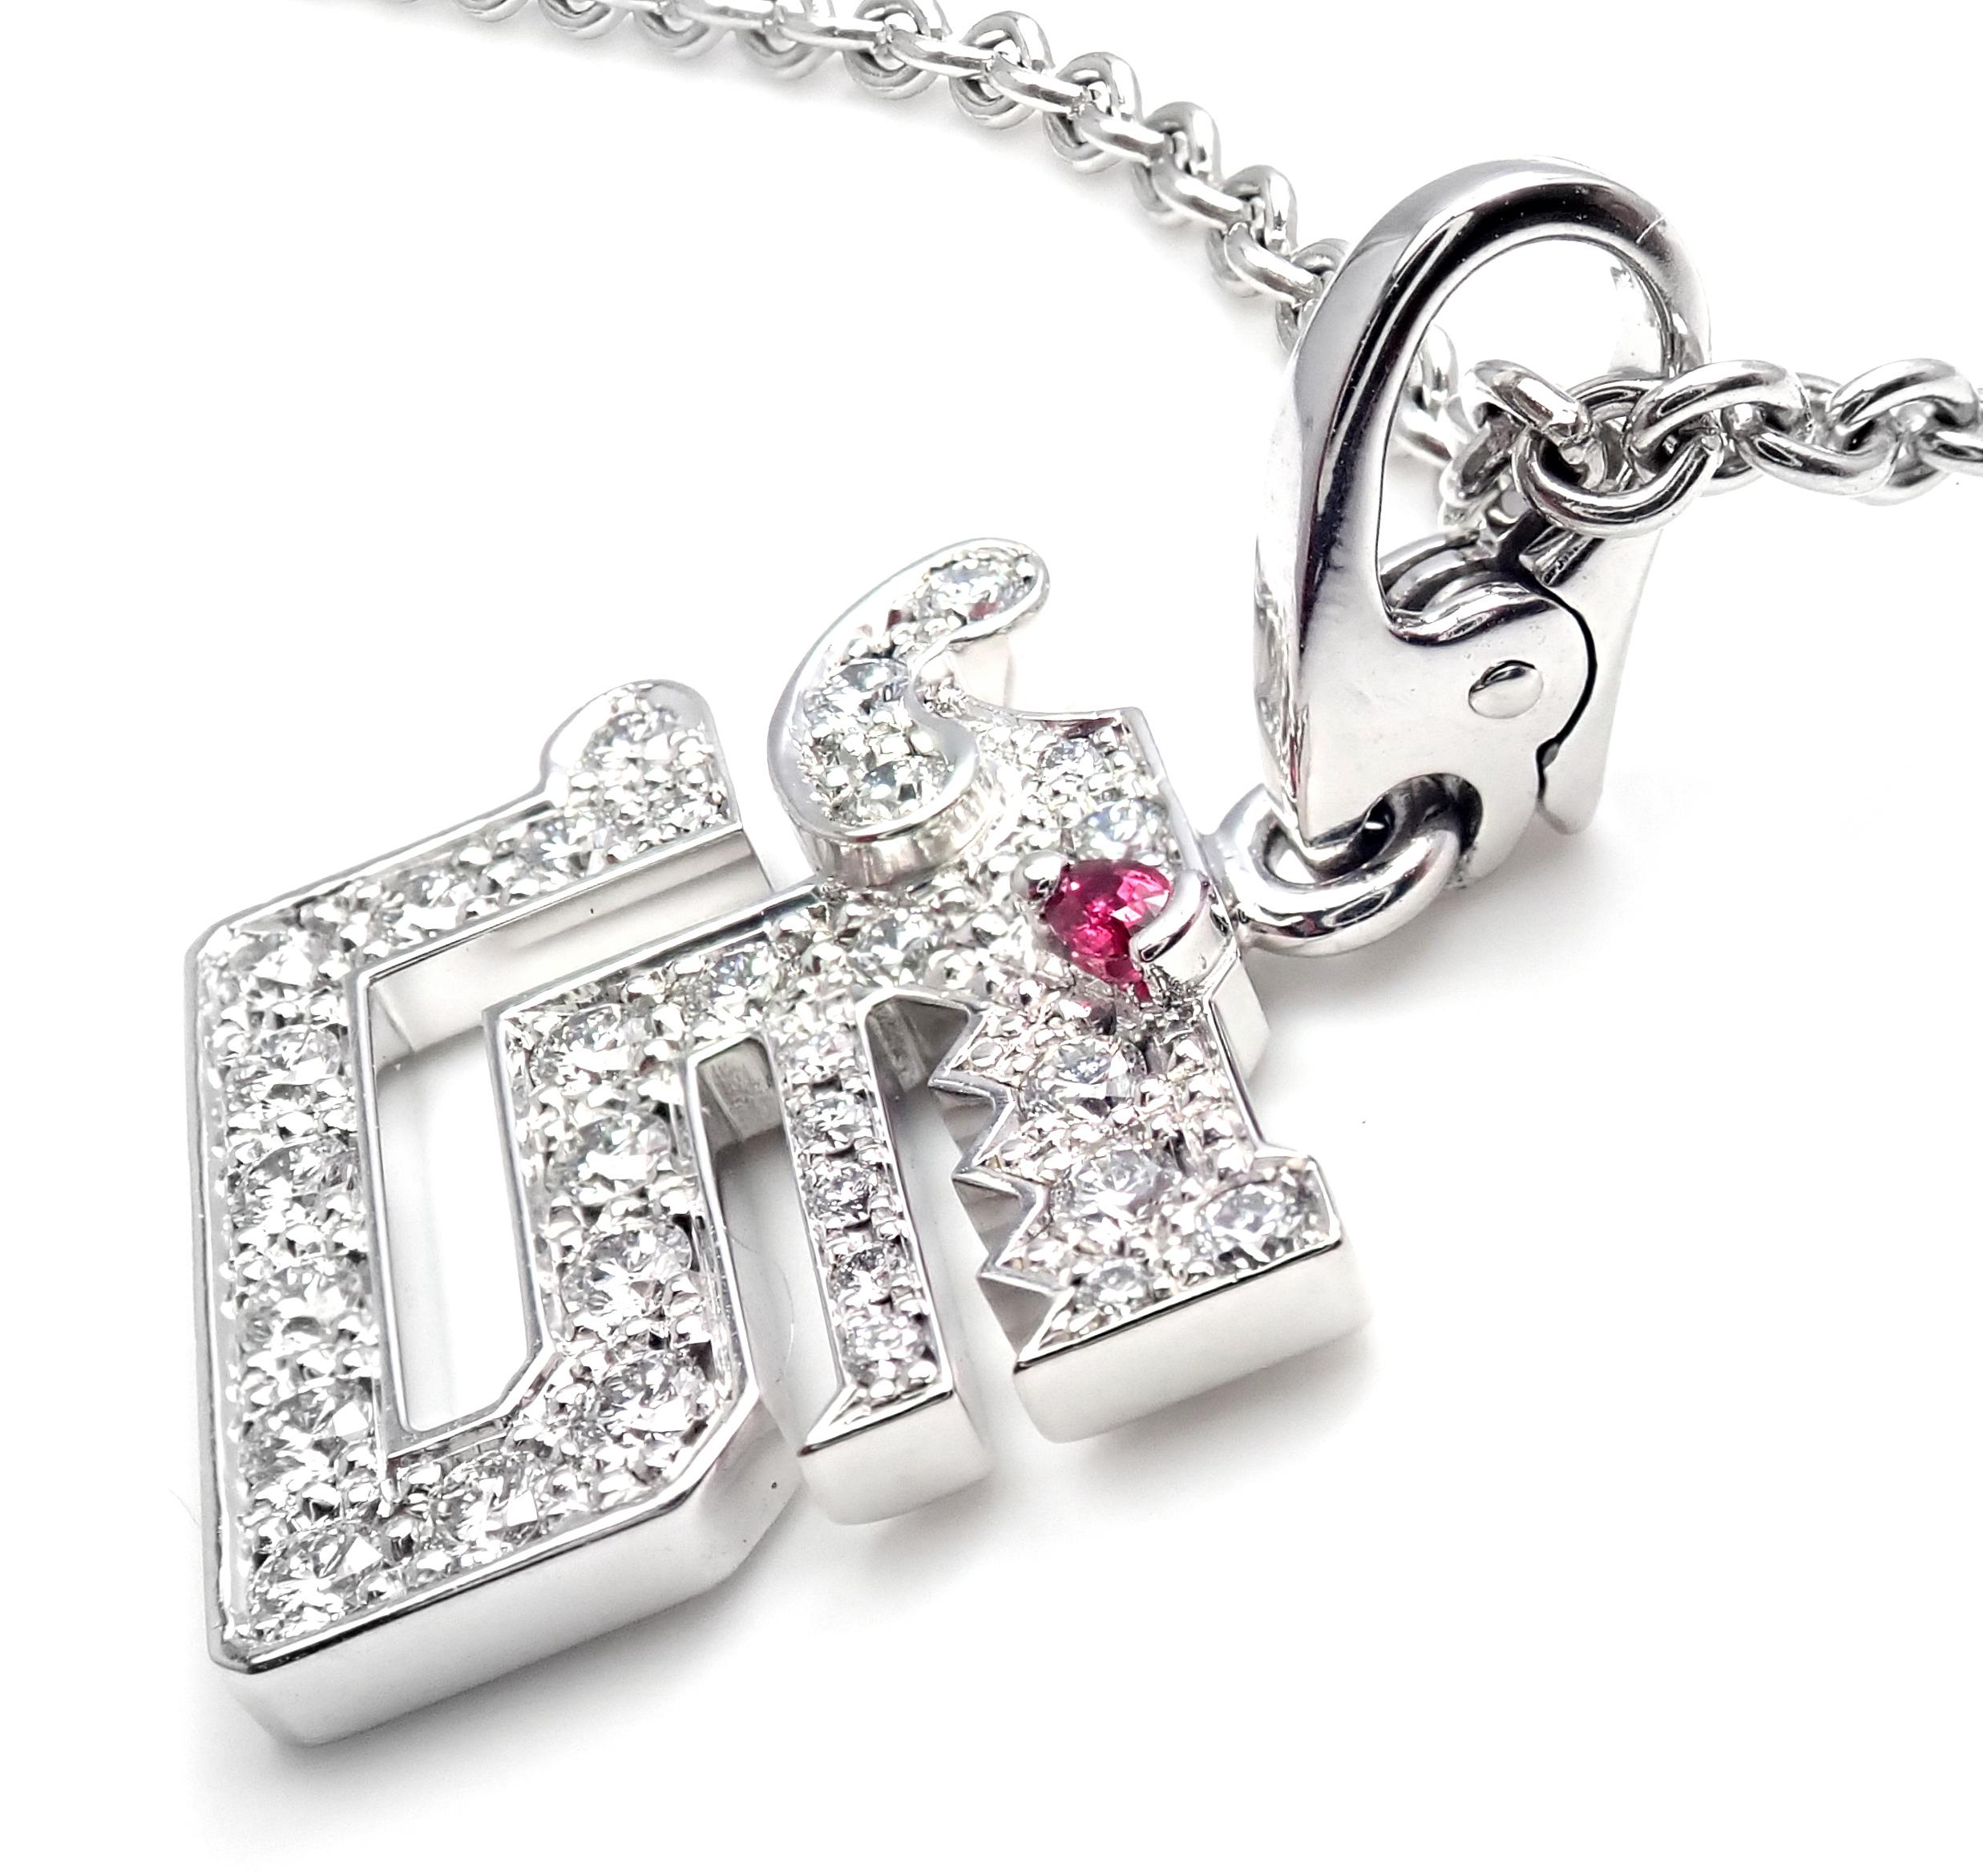 18k White Gold Diamond Baiser du Dragon Diamond Pendant Necklace by Cartier.
With 34 round brilliant cut diamonds VVS1 clarity, E color total weight approx. 1ct
1 round ruby approx. .10ct
Details:
Length: 16.5 inches long
Pendant is 16mm x